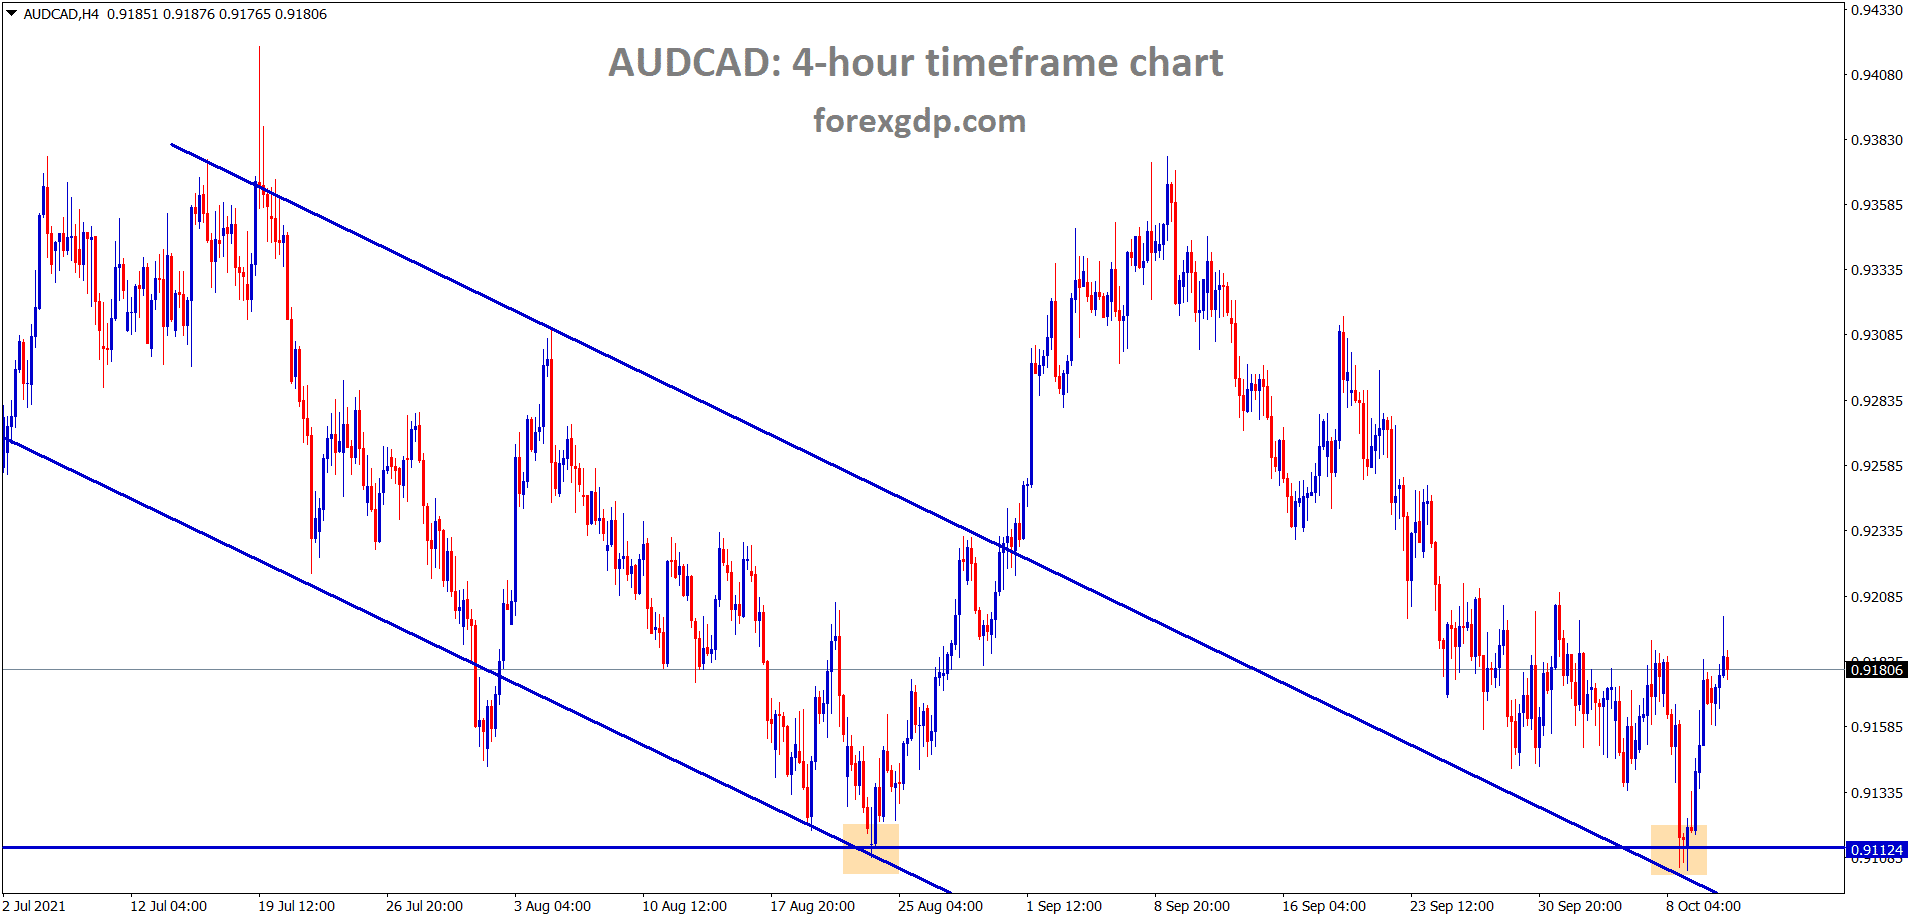 AUDCAD has retested the horizontal support and the previous descending channel area and rebounding from that zone